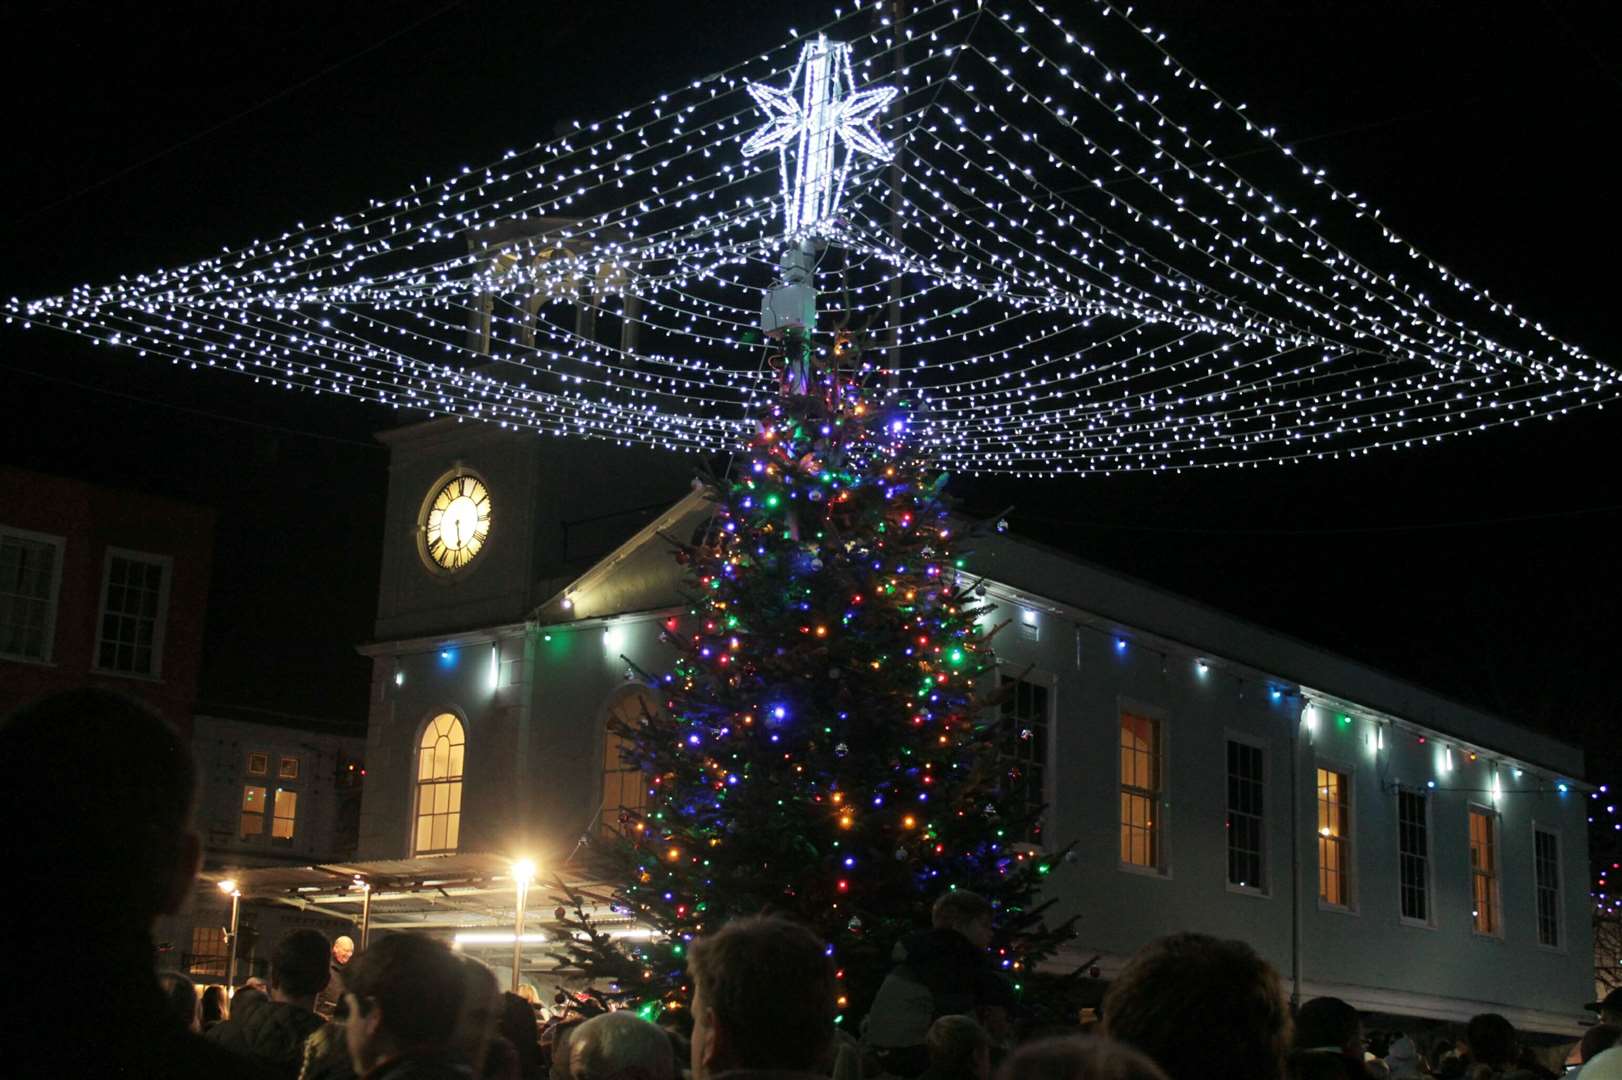 The Faversham Christmas lights switch-on has been cancelled